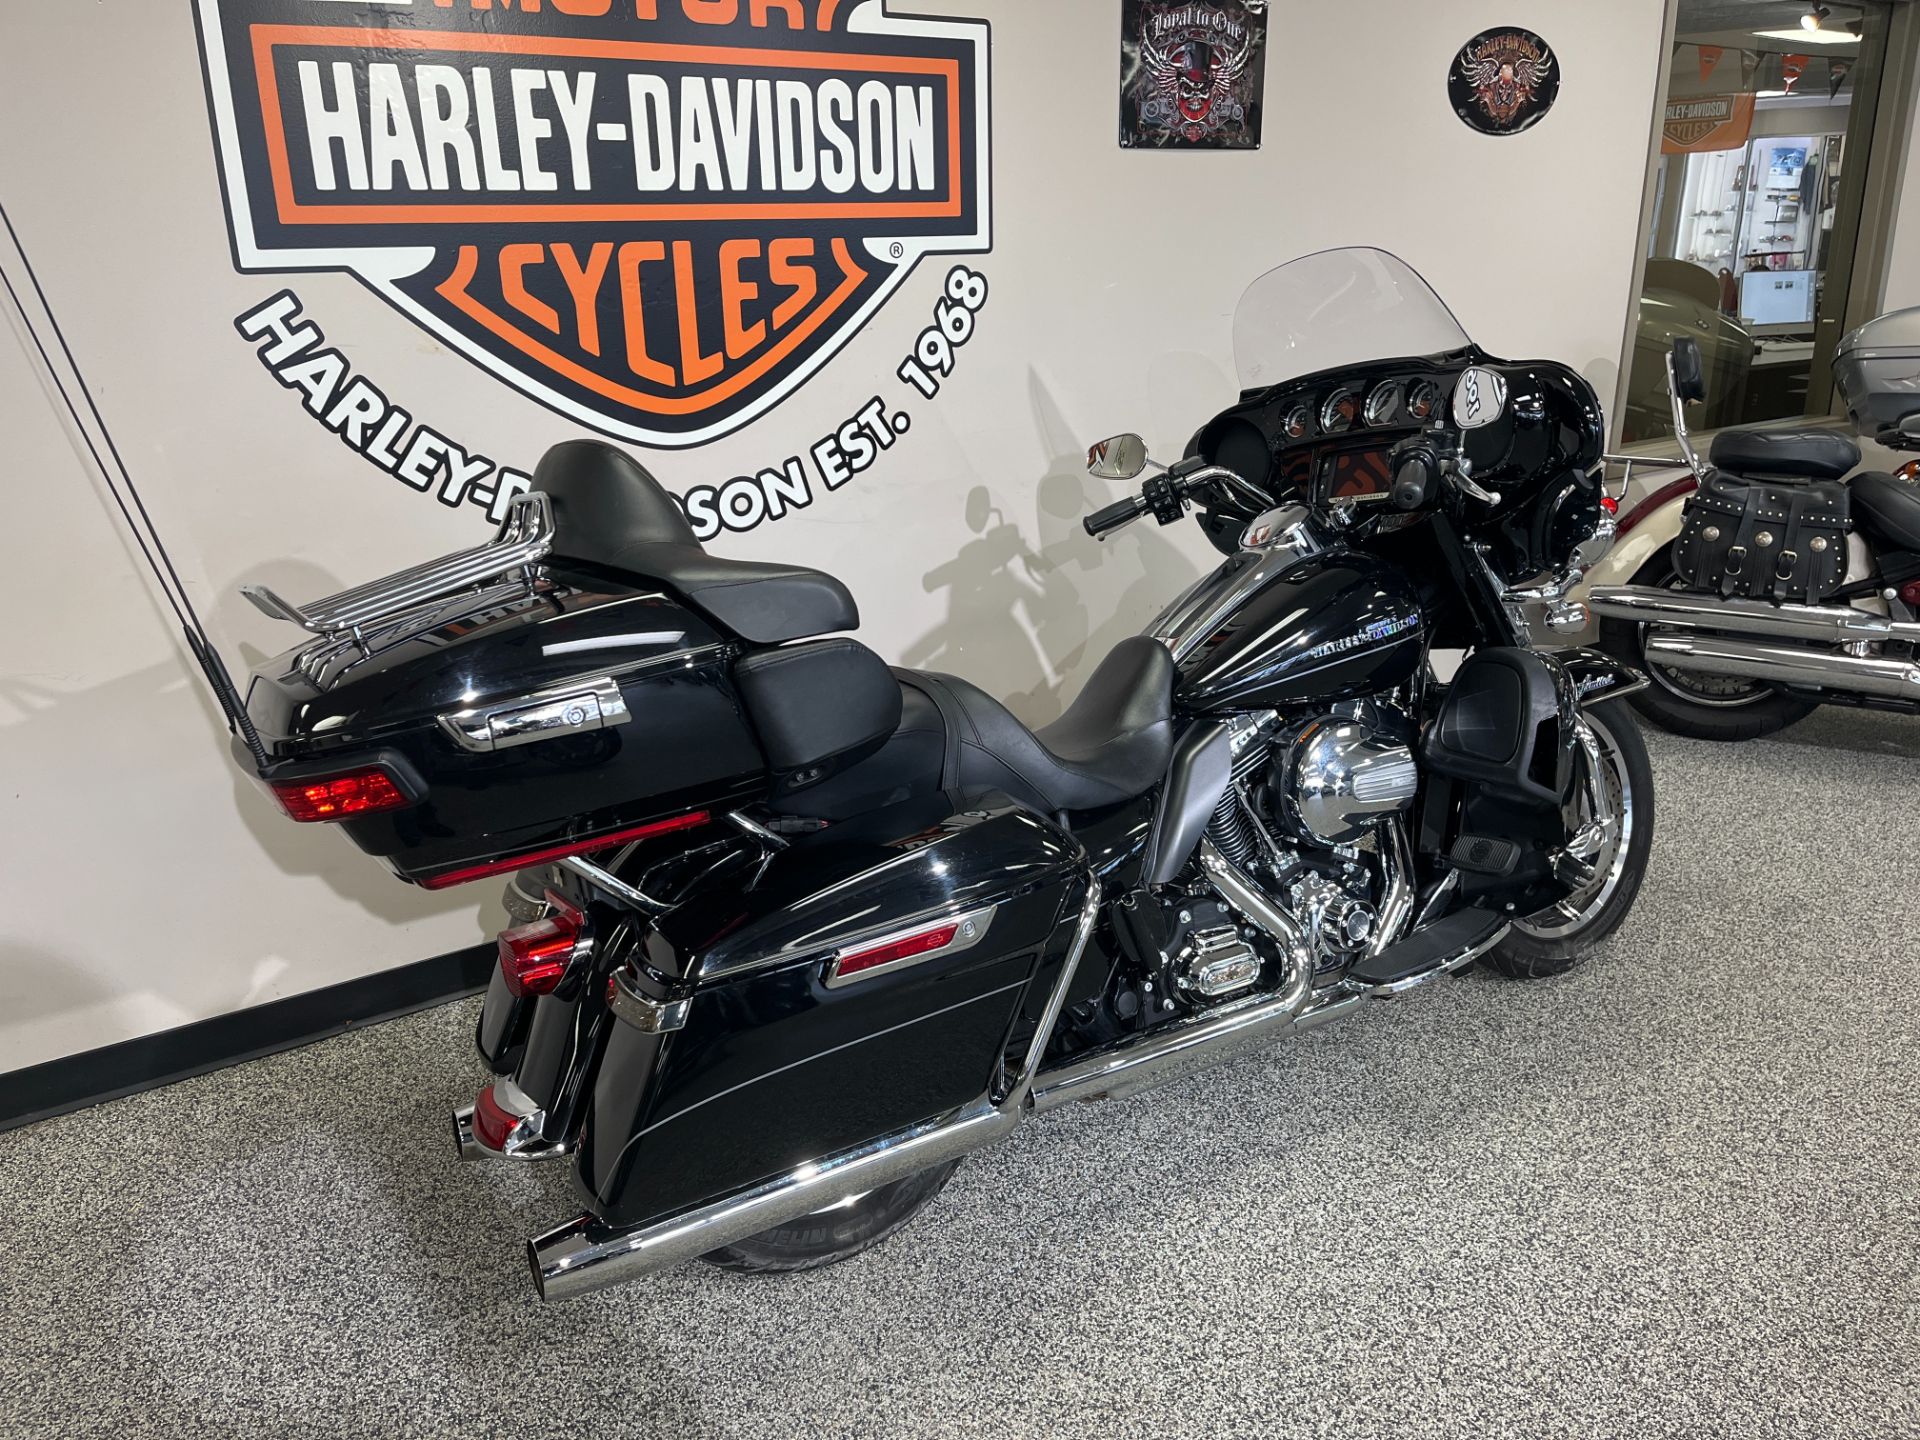 2015 Harley-Davidson Ultra Limited Low in Knoxville, Tennessee - Photo 5